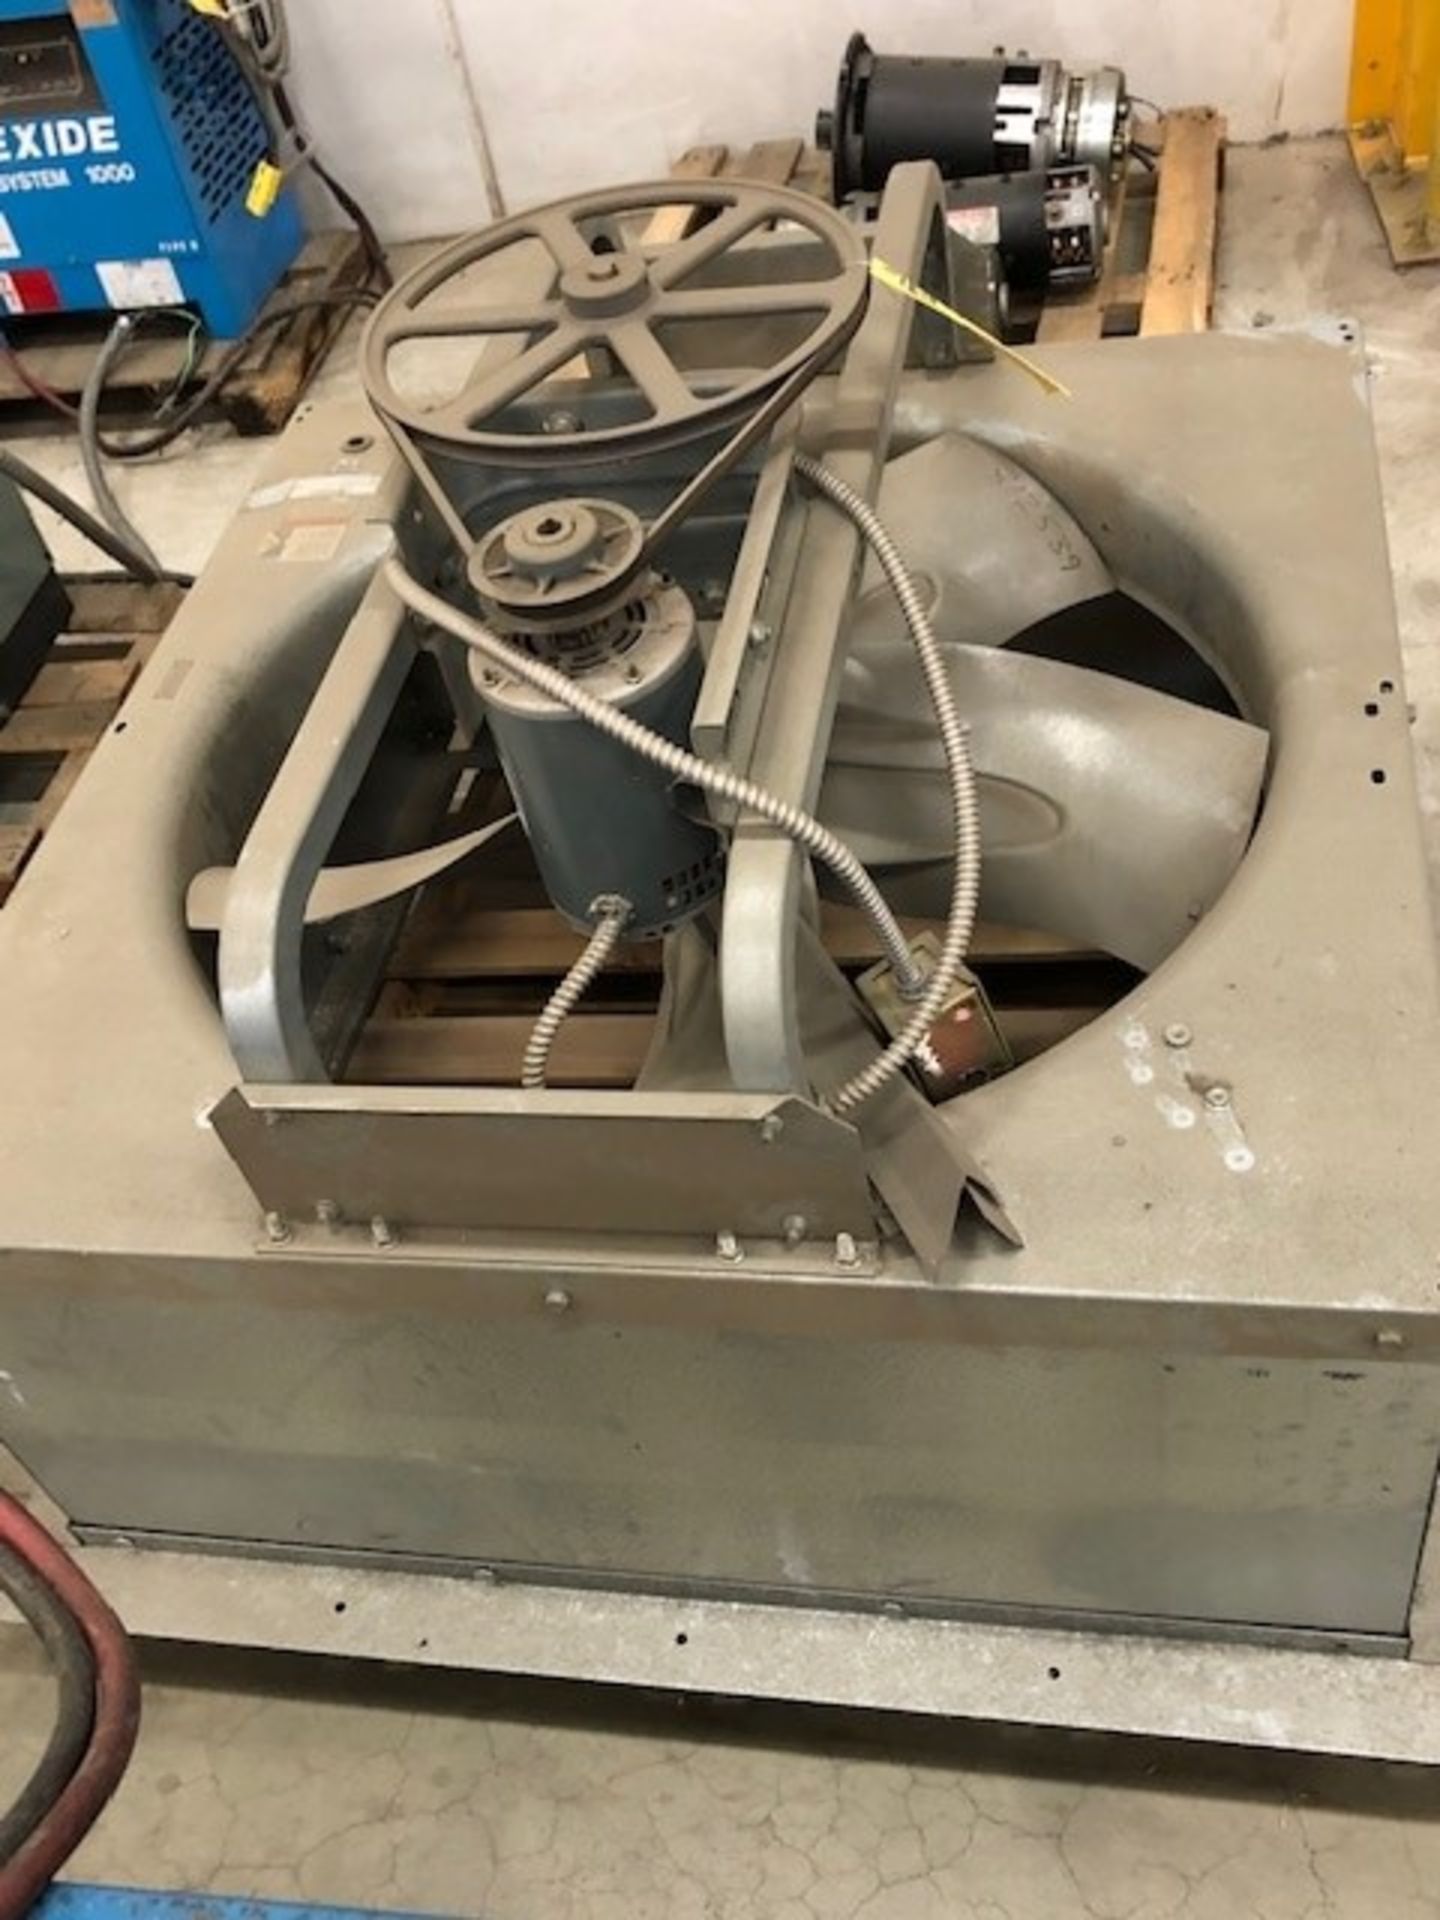 GREENHECK EXHAUST FAN; MODEL SBE-1136-7, S/N 00006388 ***LOCATED AT 13000 DARICE PARKWAY, - Image 4 of 4